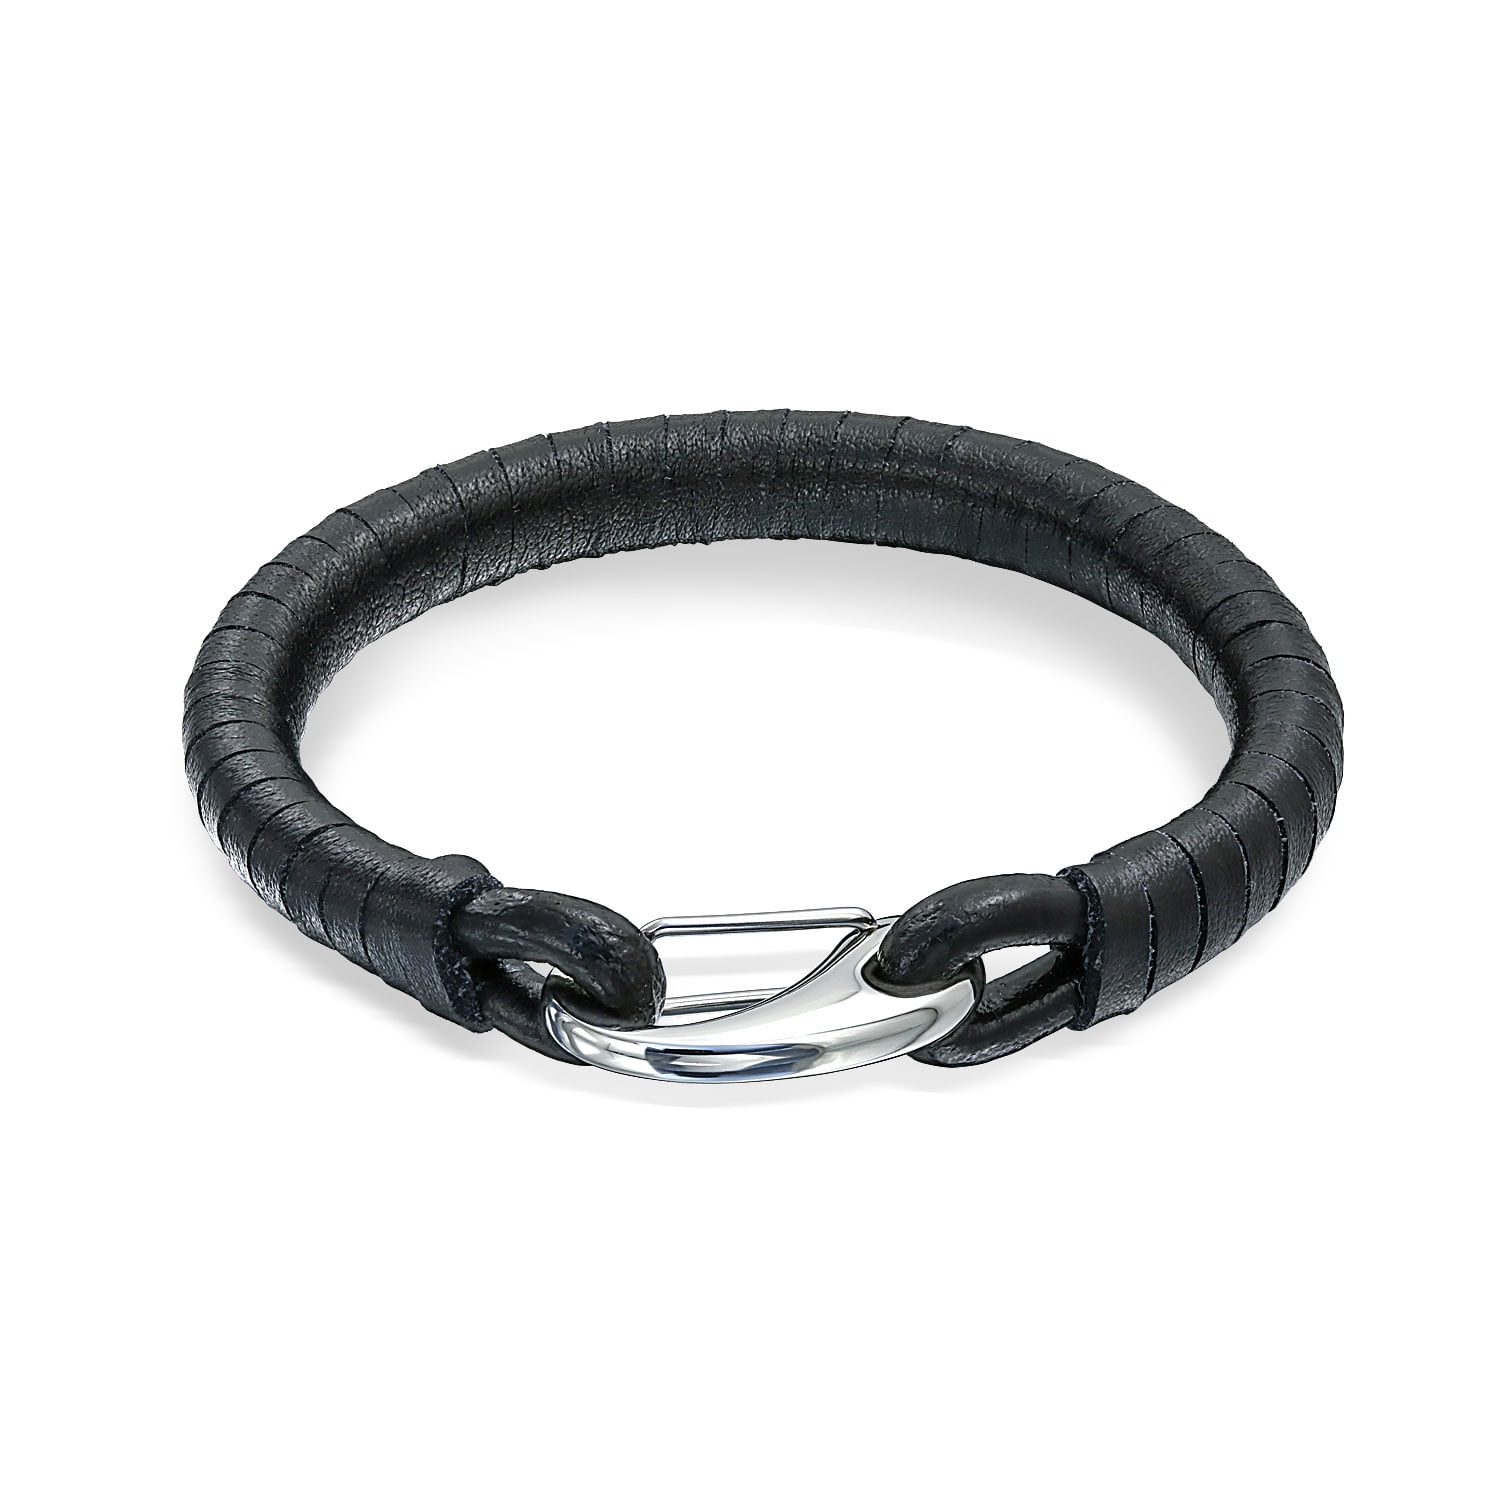 Thick Natural Black Braid Womens Bracelet Womens Leather Bracelet Womens Jewelry Toggle Clasp